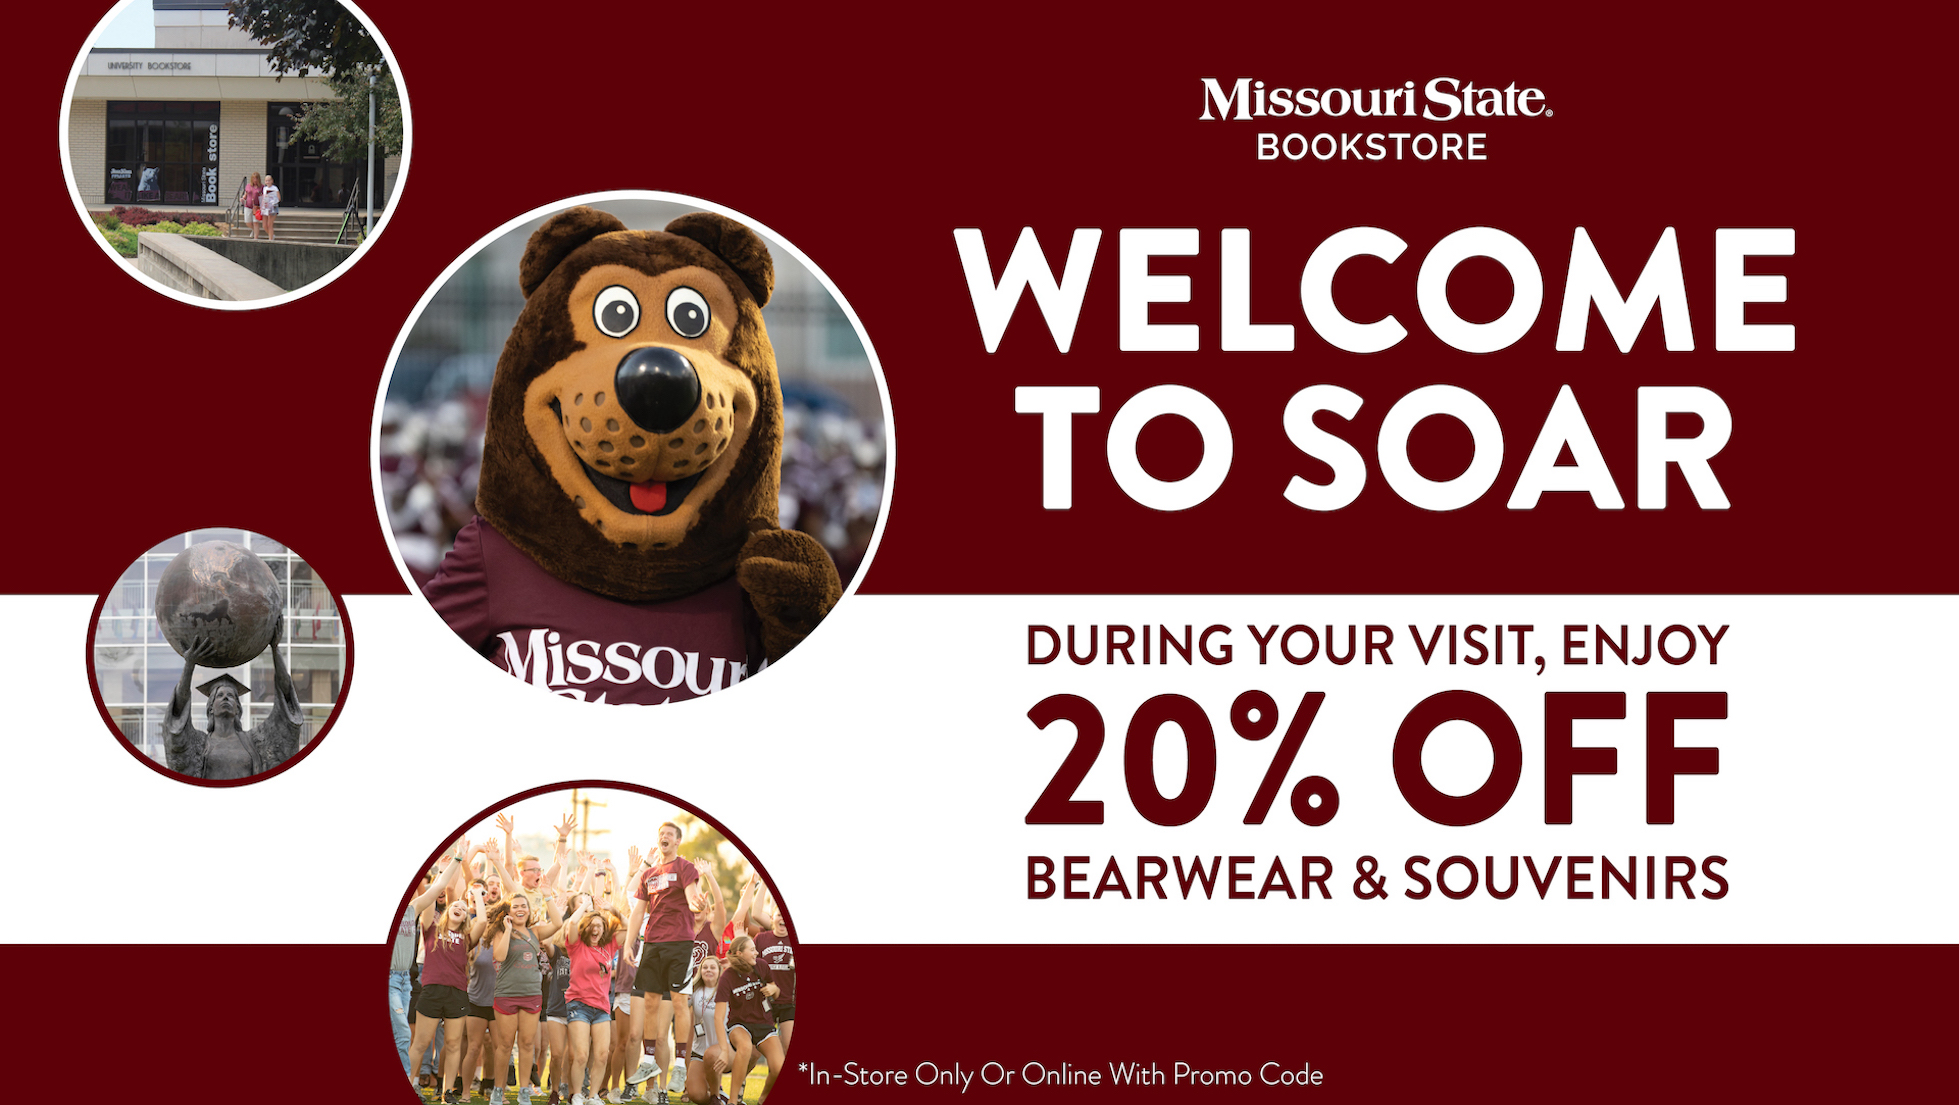 welcome to soar from the missouri state bookstore. save 20% on bearwear and souvenirs when you shop instore or online with special soar promo code - only available during your soar session.